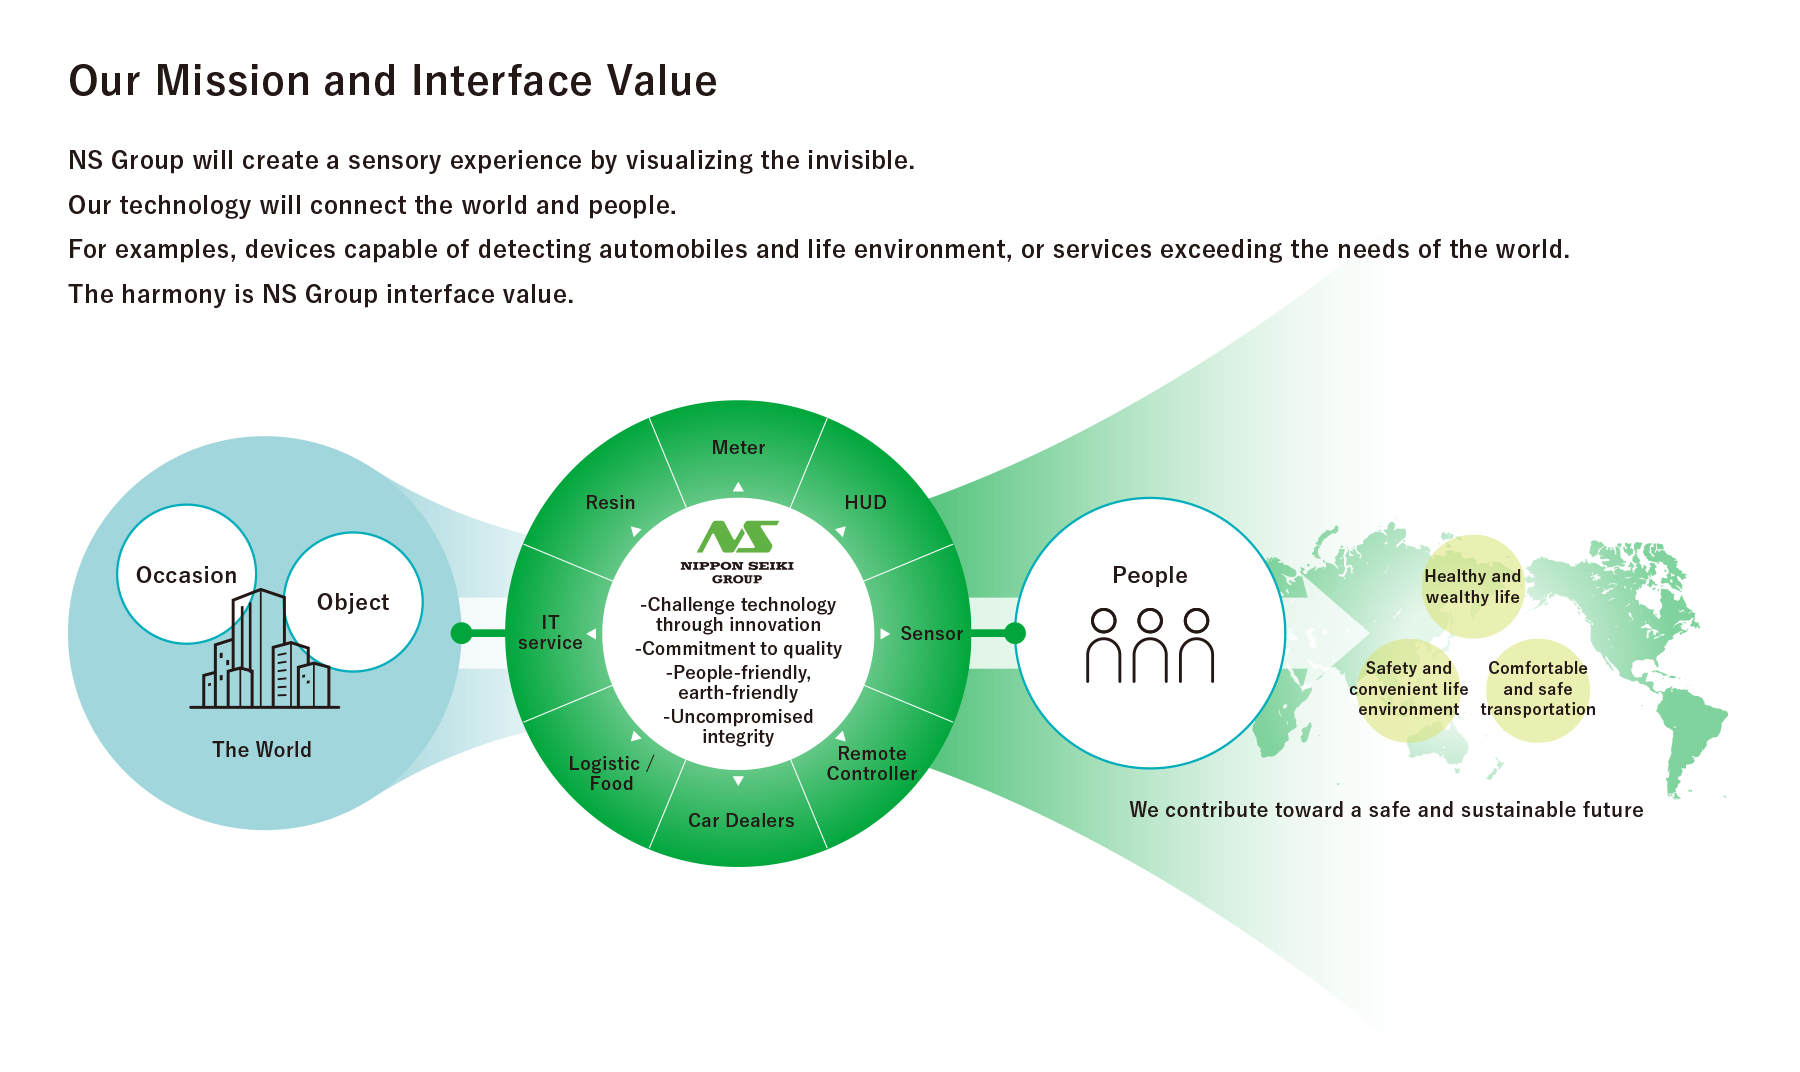 Our Mission and Interface Value